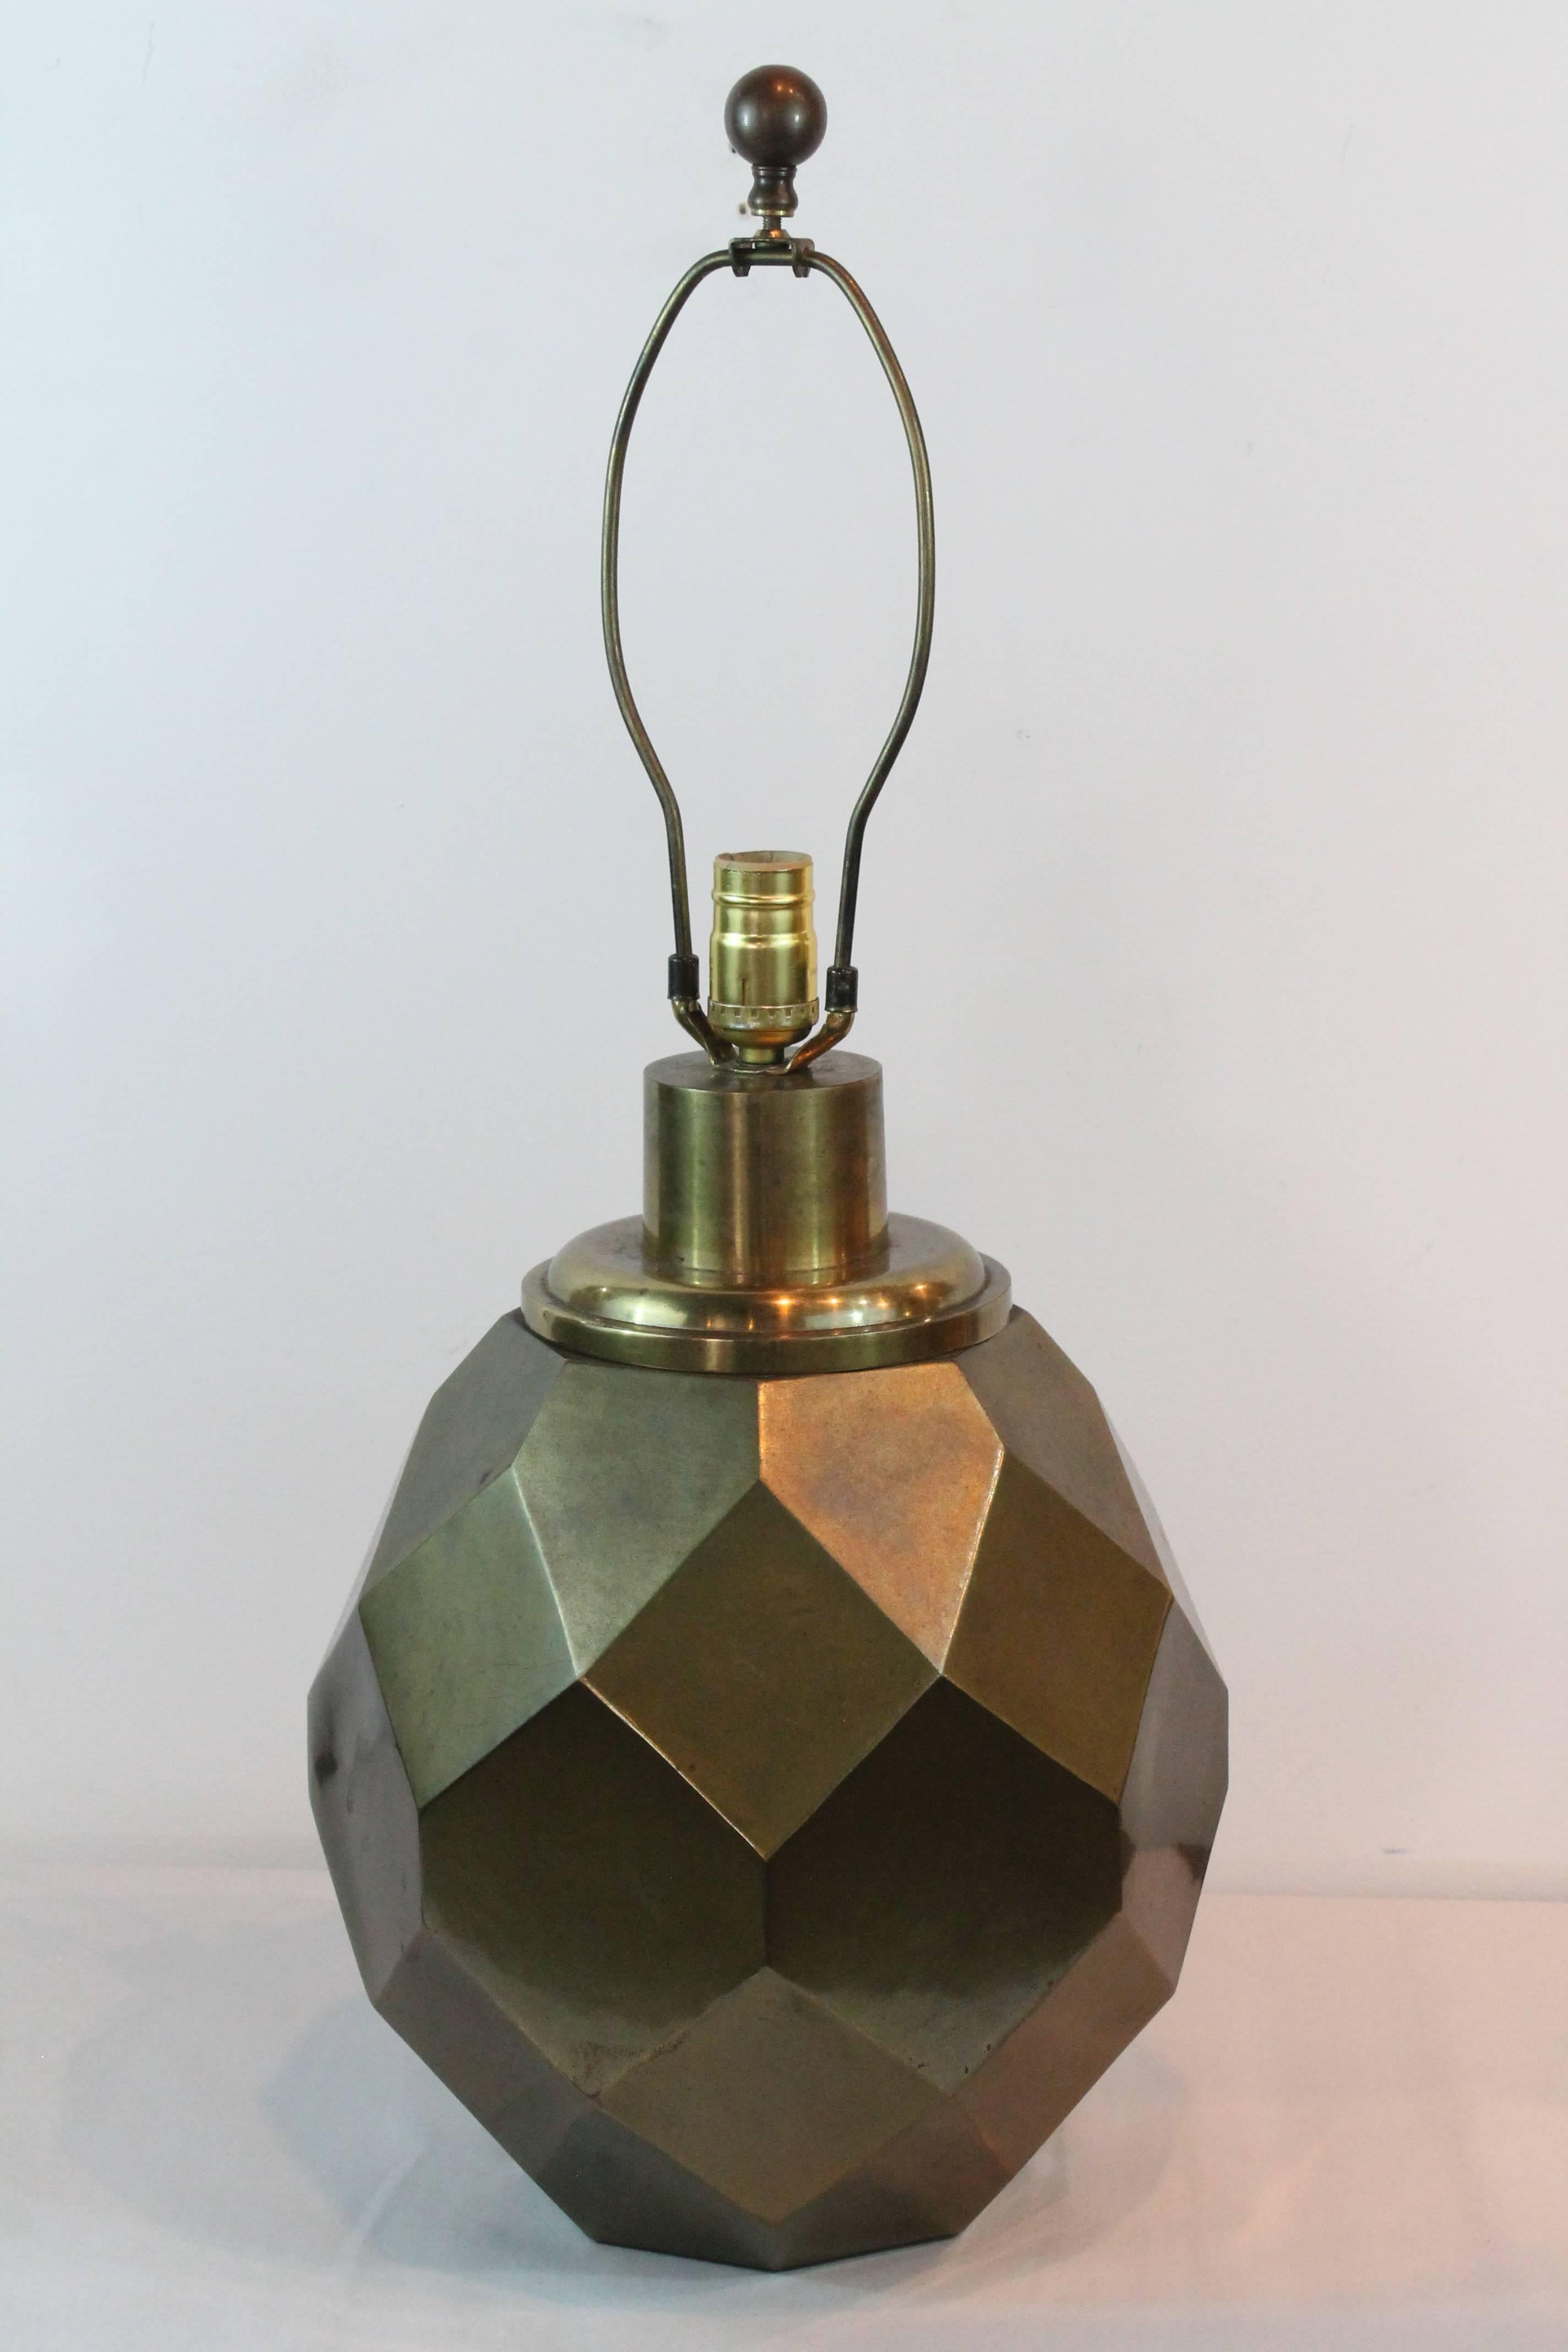 Geodesic Brass Lamp In Excellent Condition For Sale In 3 Oaks, MI